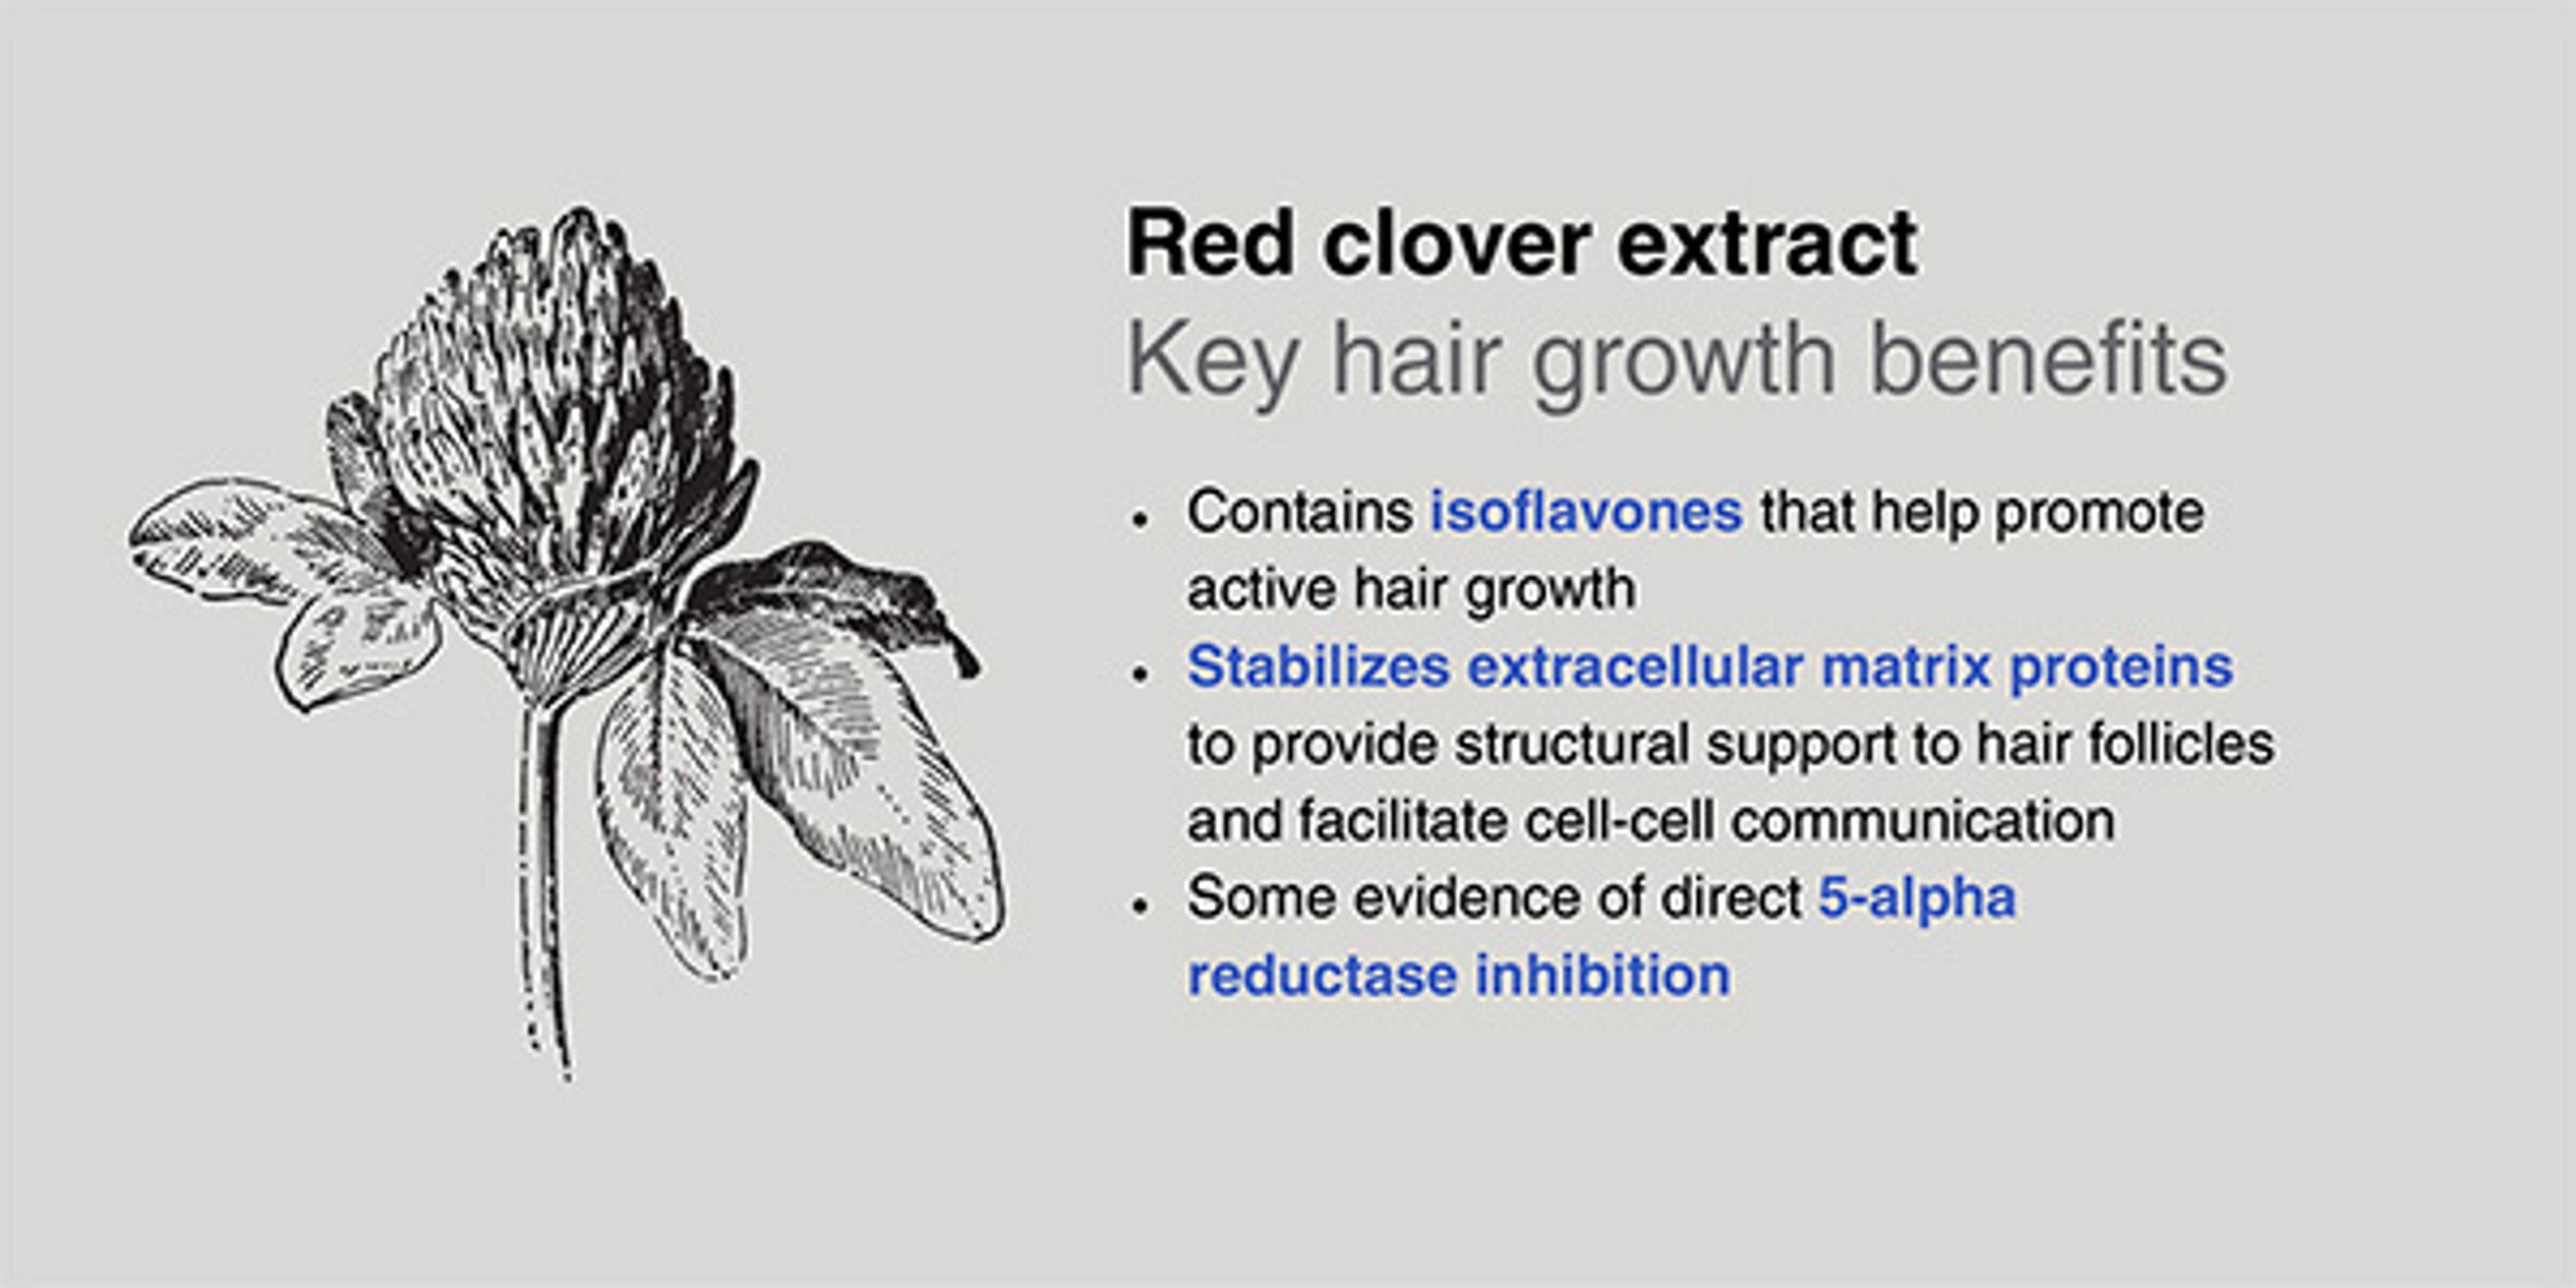 Benefits of red clover extract include high isoflavone level, stabilizing matrix proteins and DHT blocking.